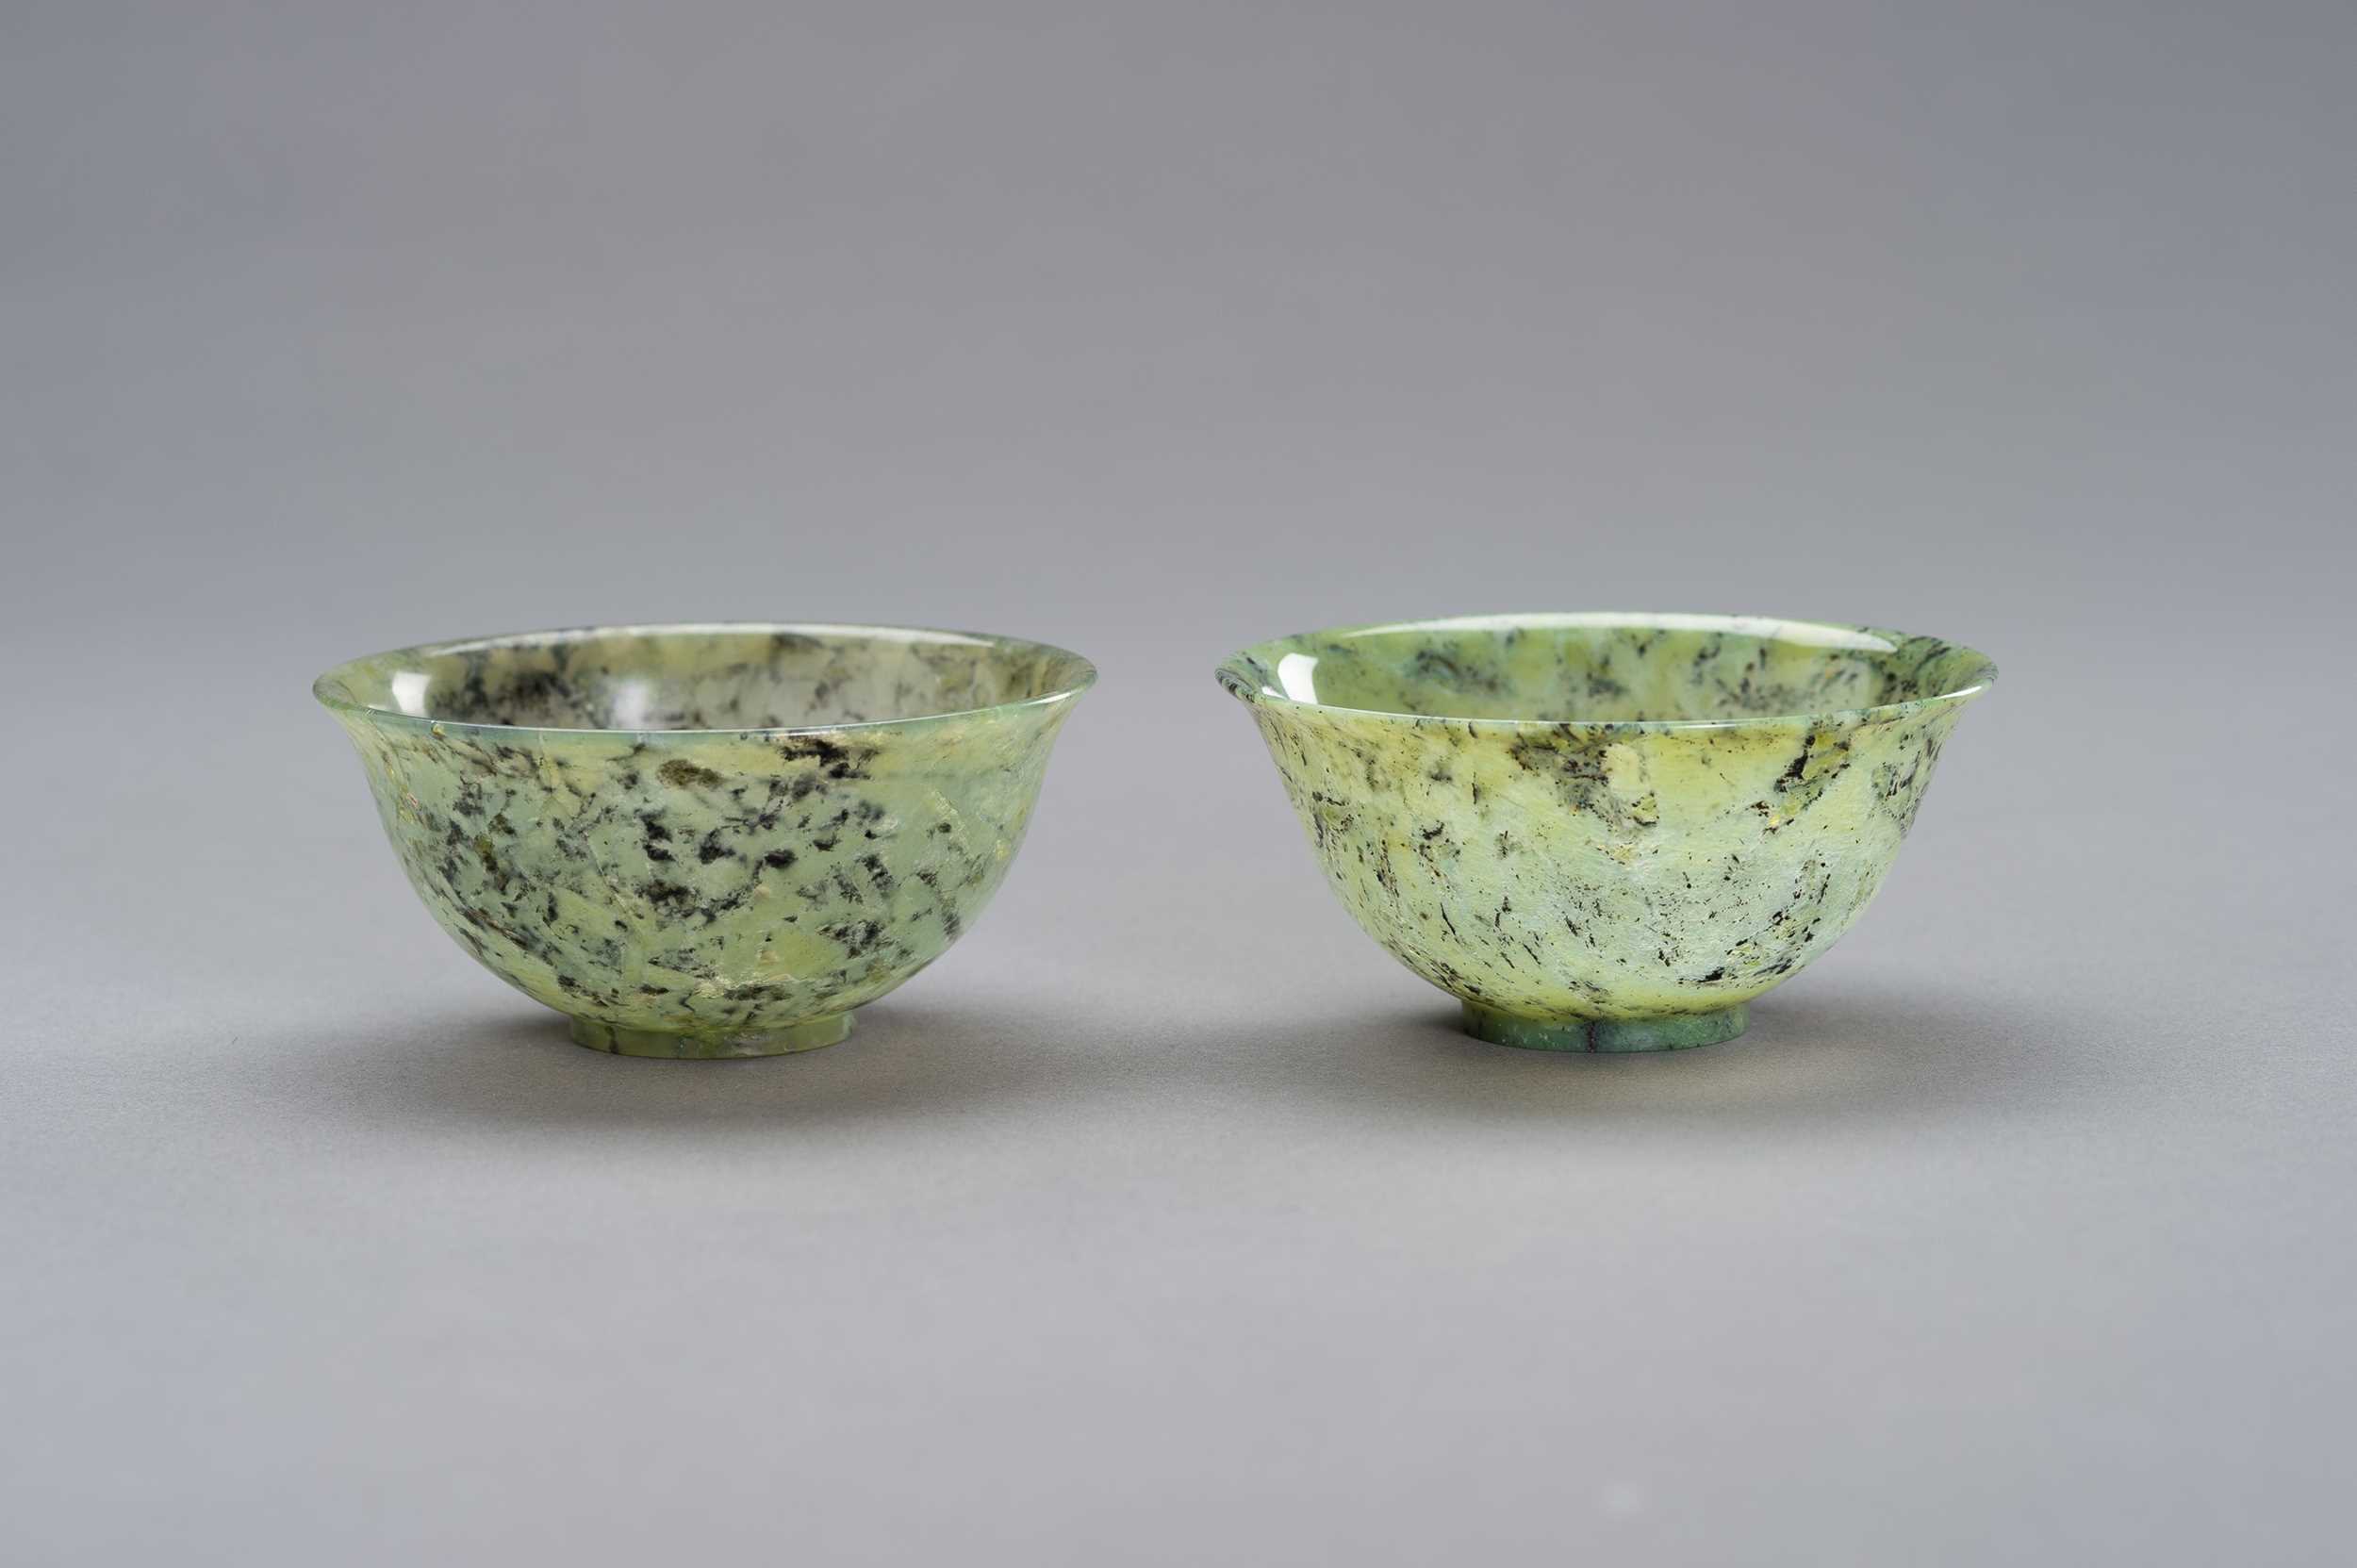 Lot 296 - A MOTTLED PAIR OF JADE BOWLS